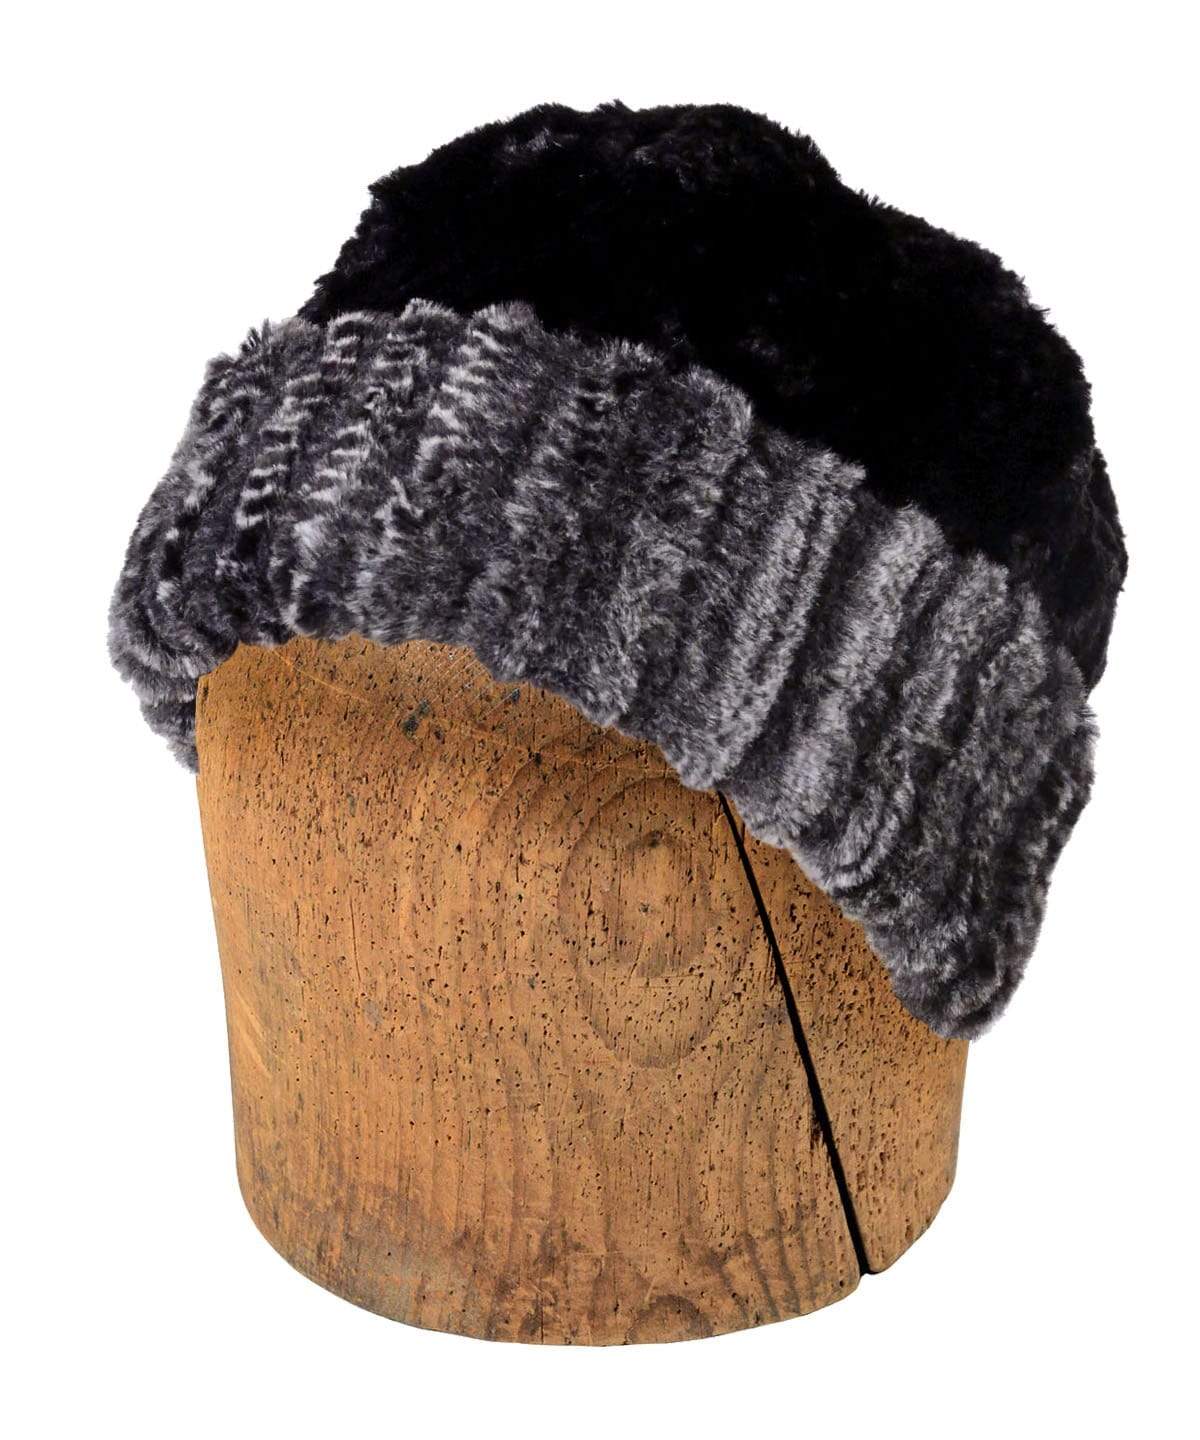 Men's Beanie Hat shown in Slouchy Style| Rattle N Shake Grayish Black Snake Print Faux Fur | Handmade in the USA by Pandemonium Seattle